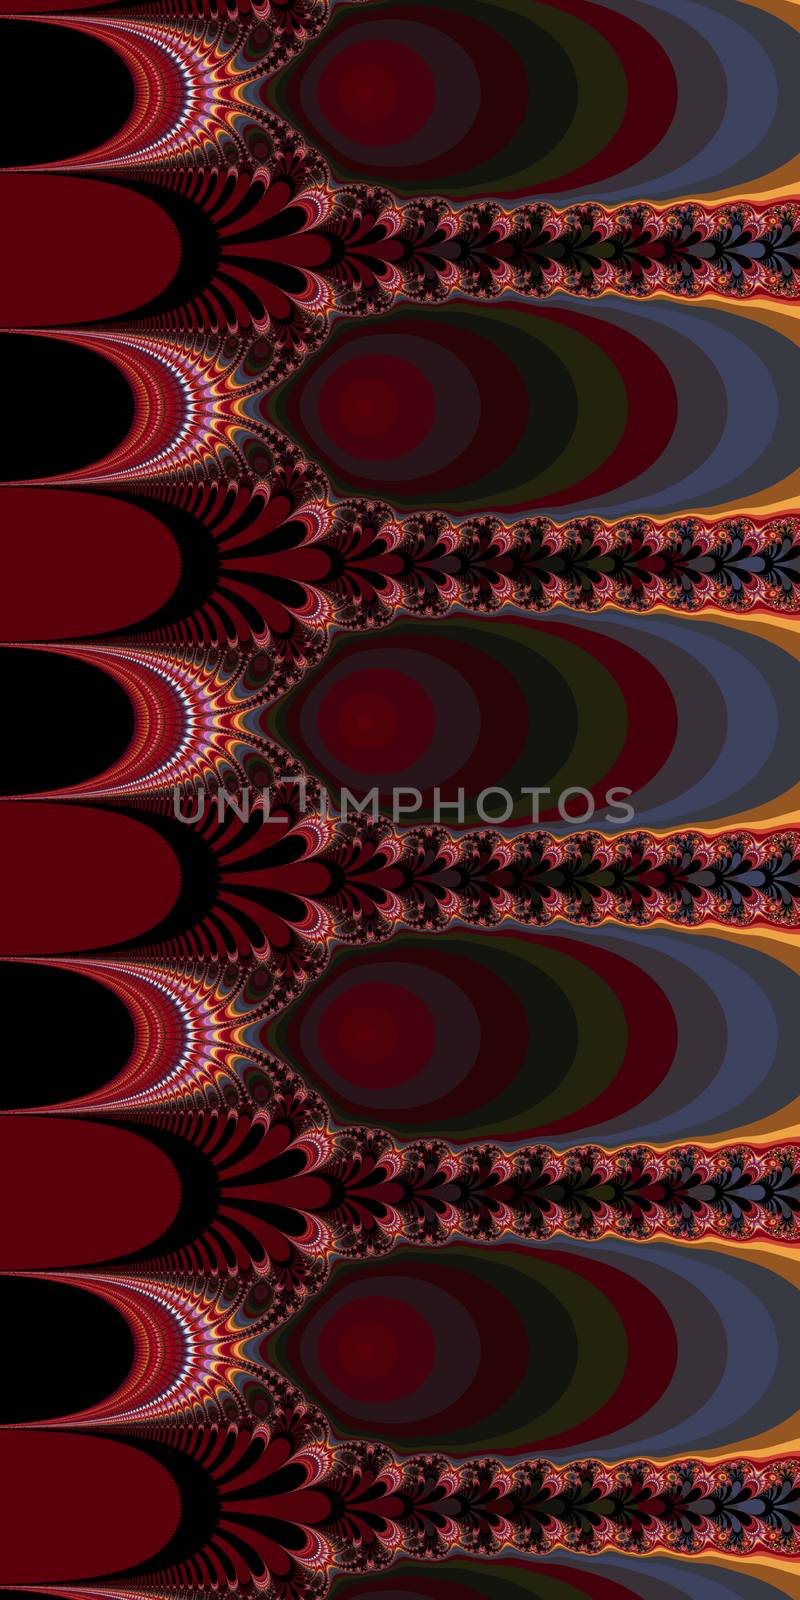 An abstract fractal design representing a cathedral window in multiple colors.